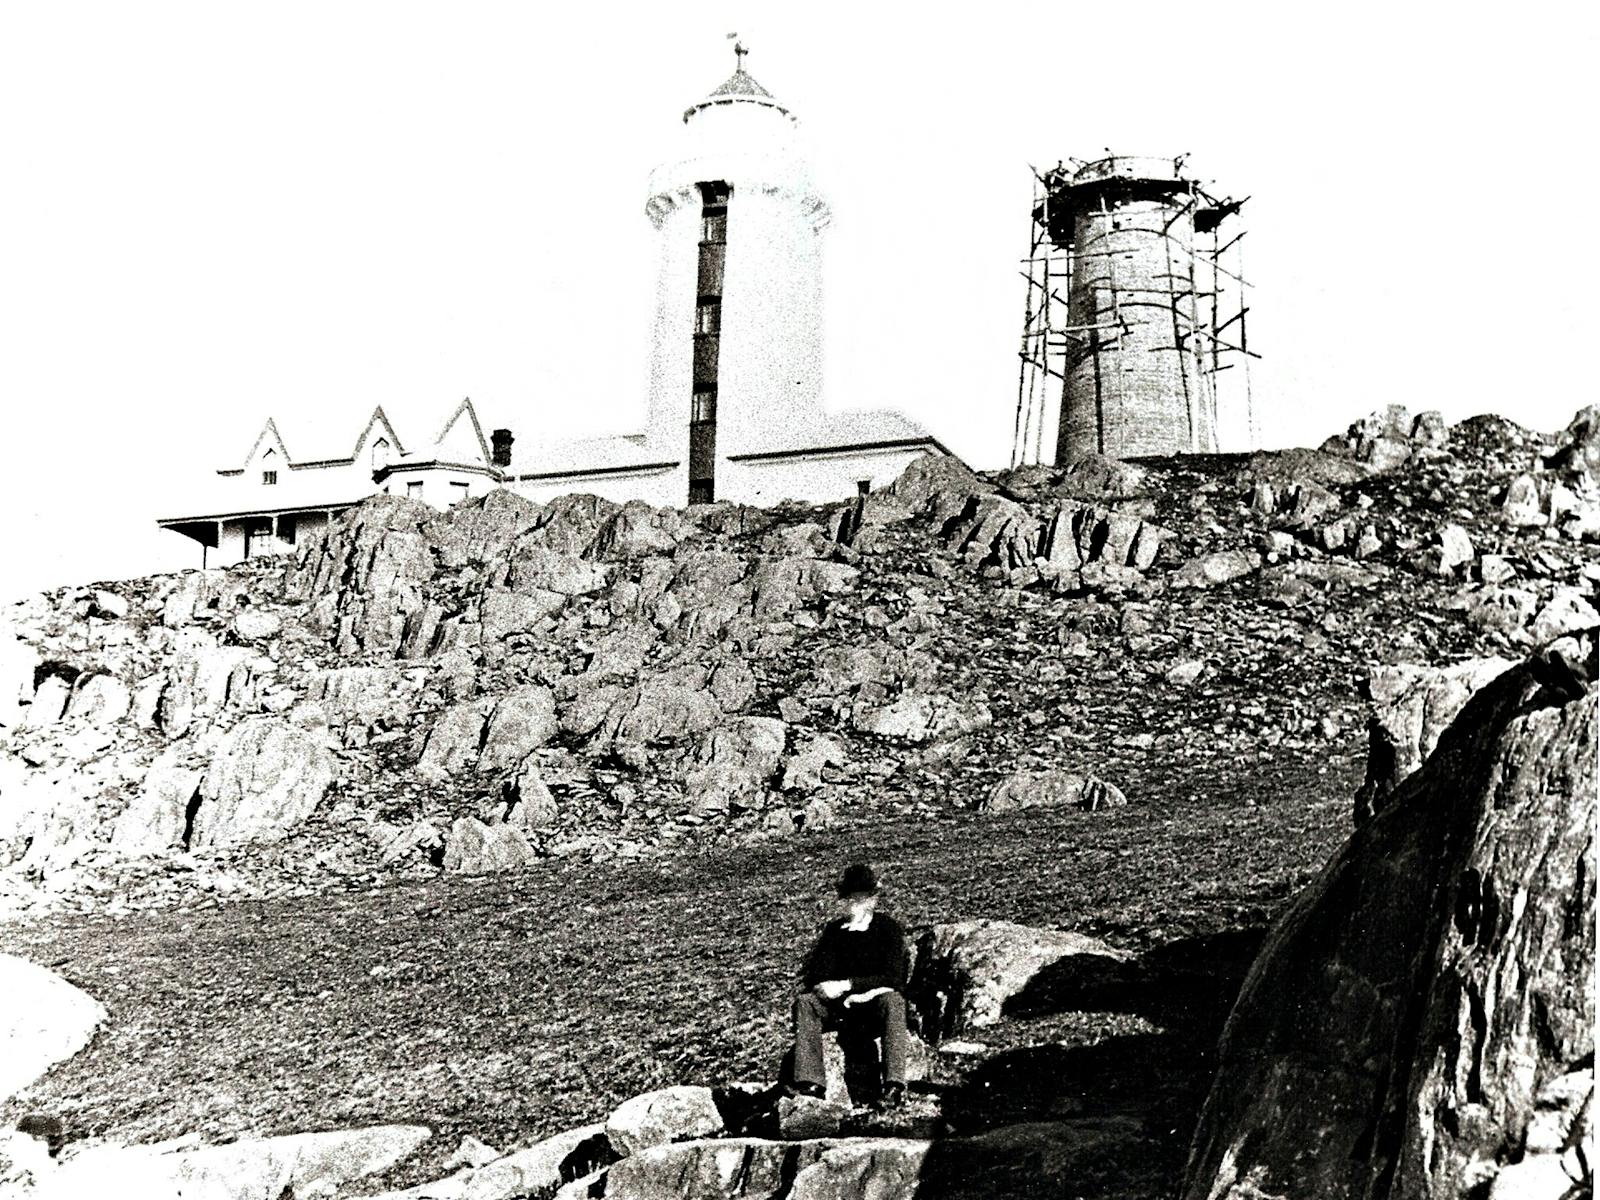 The 1833 Lighthouse with the 1888 Lighthouse under construction